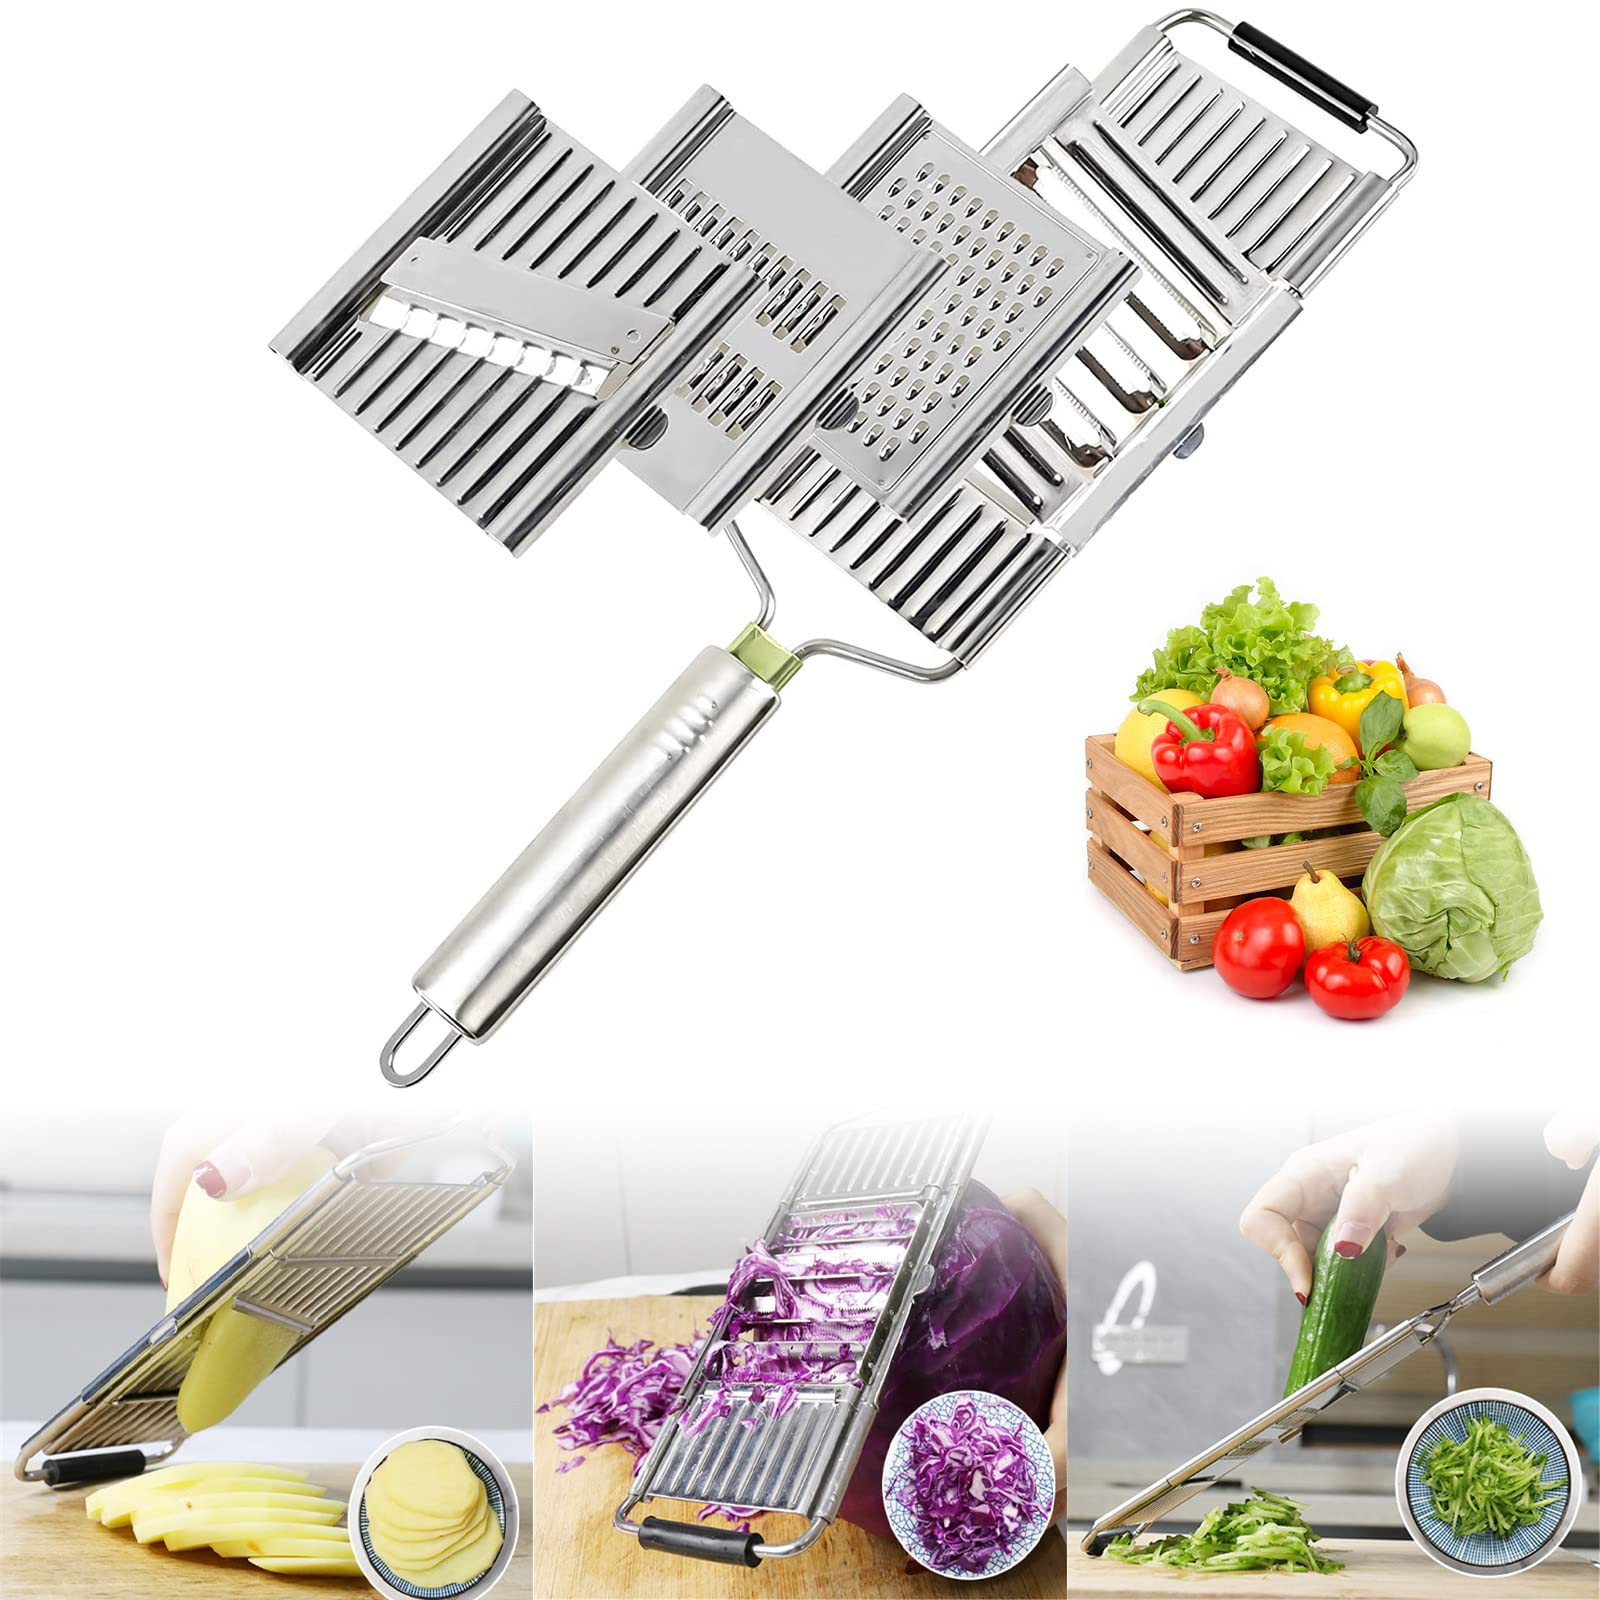 Portable Stainless Steel Vegetable Cutter Peeler Kitchen Tool 3-in-1 Multifunctional Vegetable Slicer Multi-Purpose Vegetable Graters for Cutting 